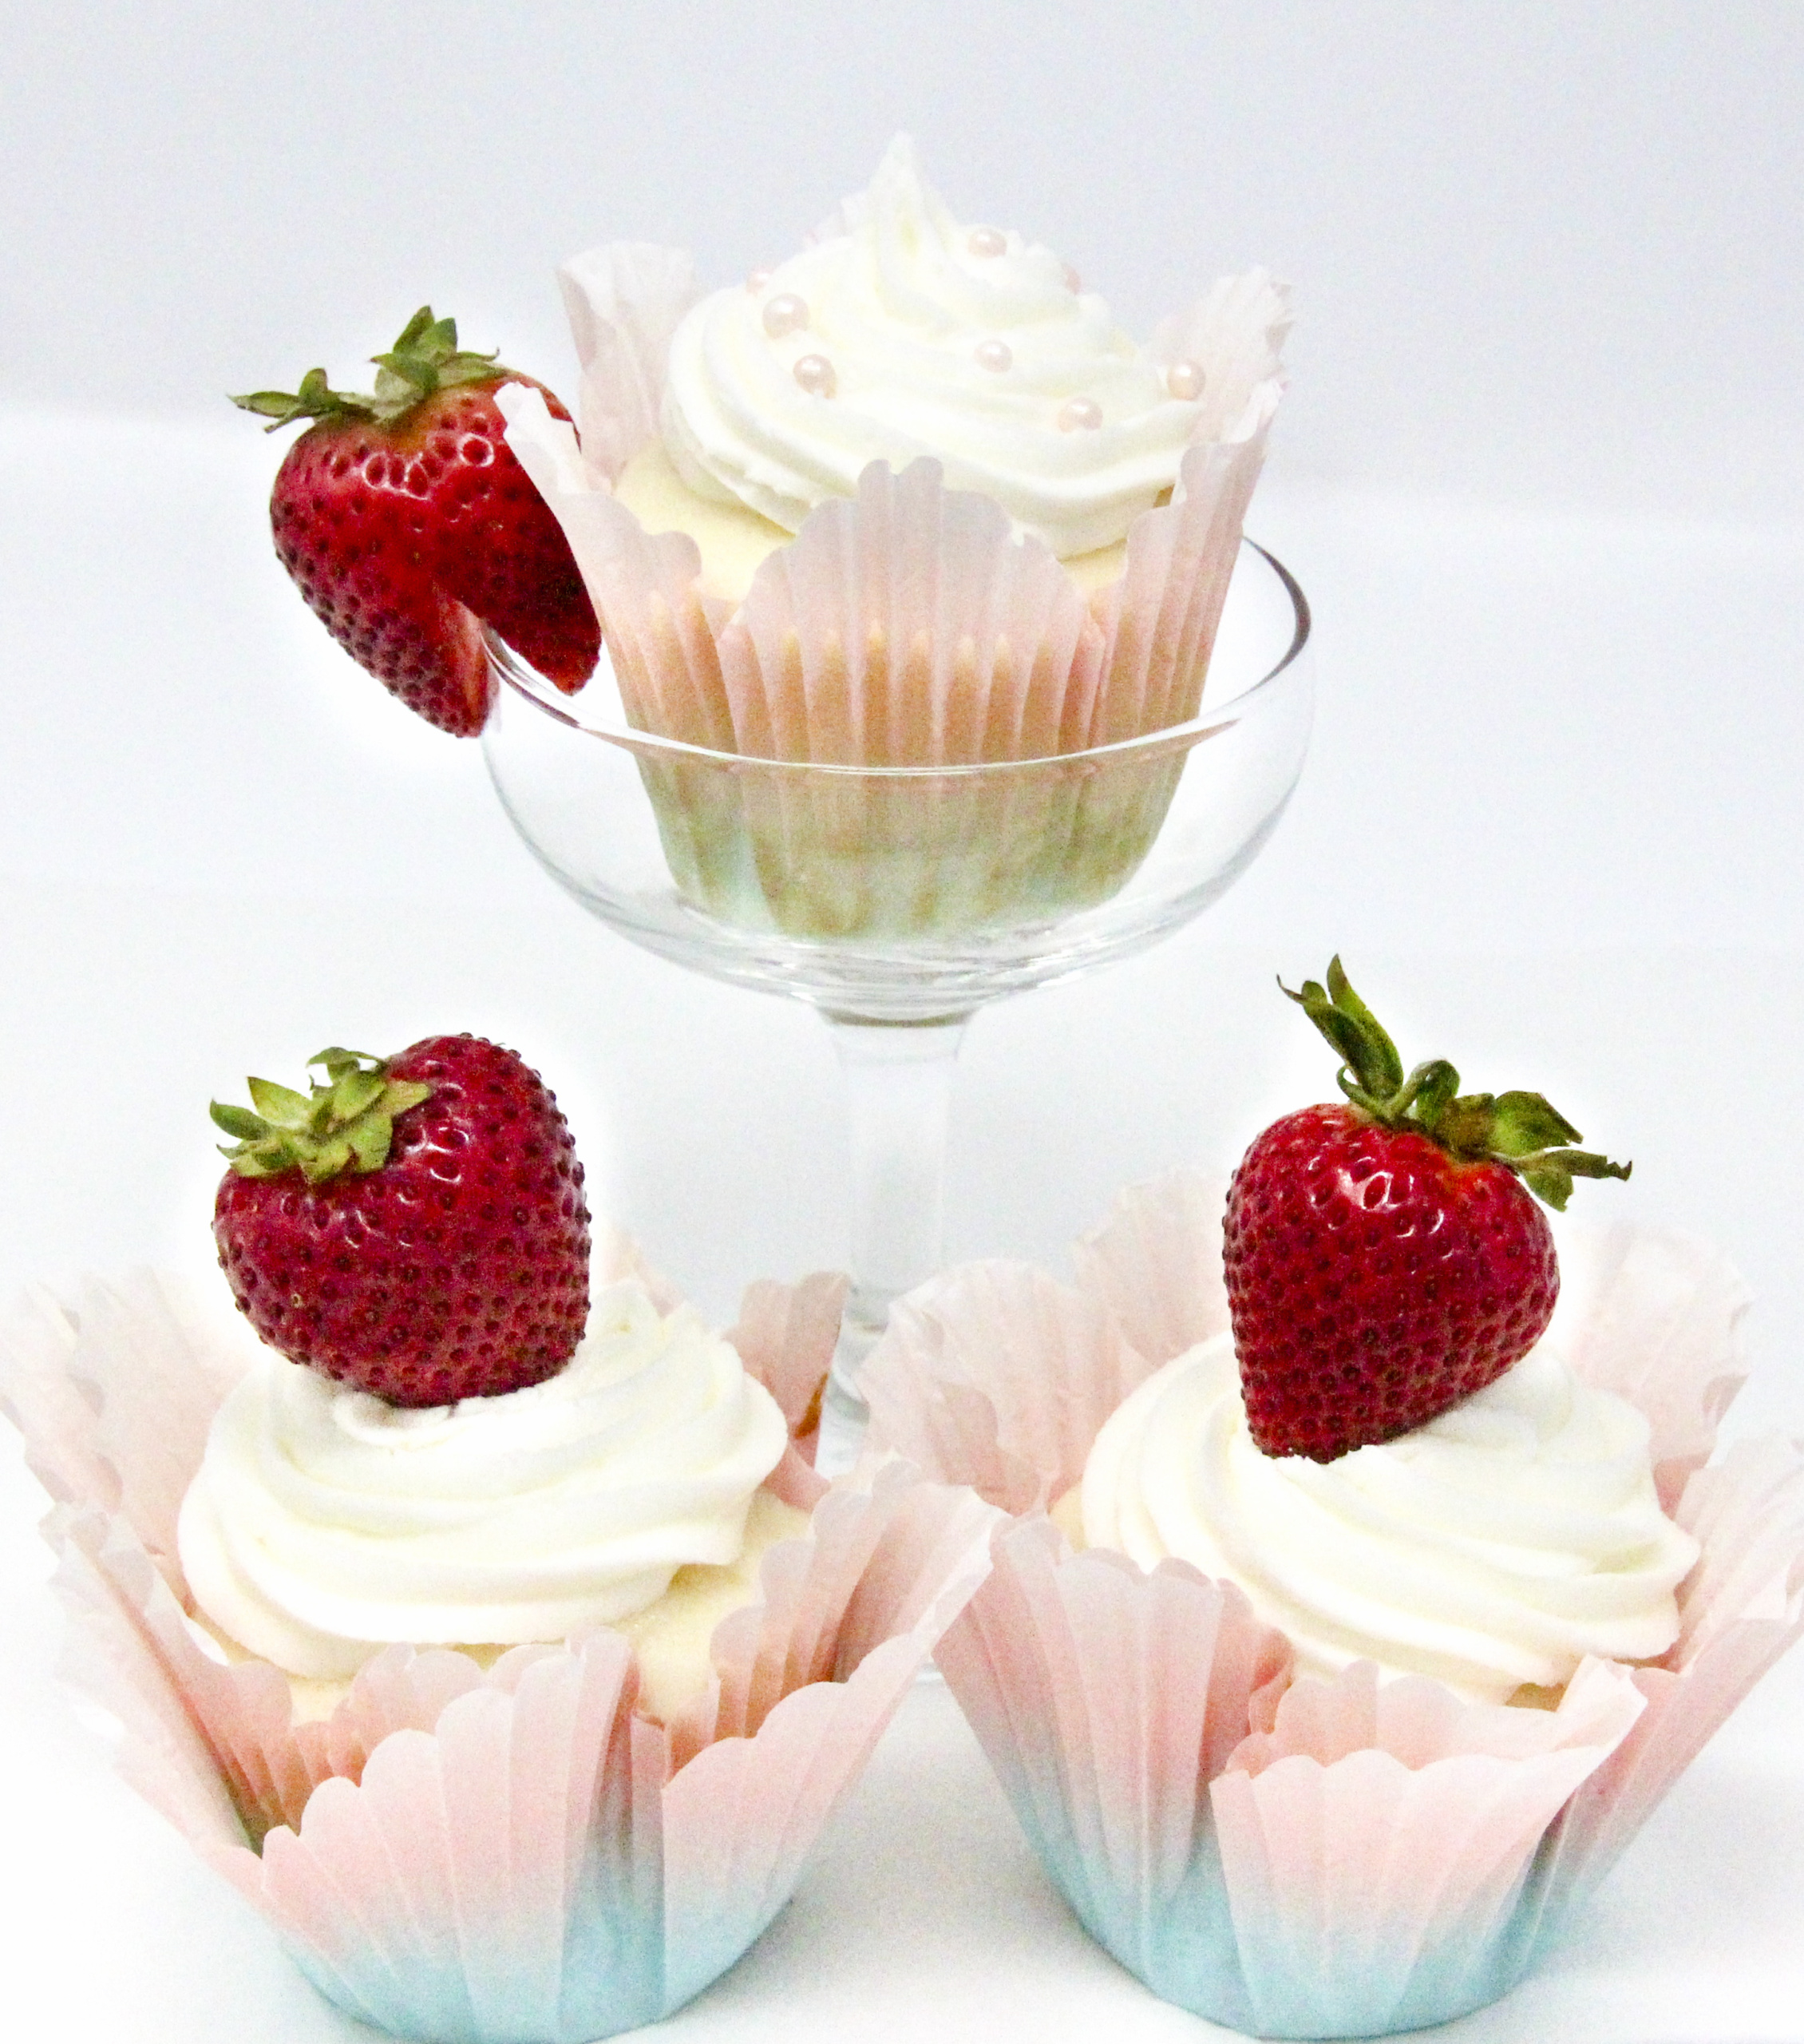 Champagne Cupcakes starts with a boxed mix (making this a quick dessert to mix up) and the champagne gives it a light, airy texture. A simply, creamy buttercream frosting makes for the perfect backdrop for any type of decoration or celebration. Recipe from FRAMED AND FROSTED by Kim Davis.